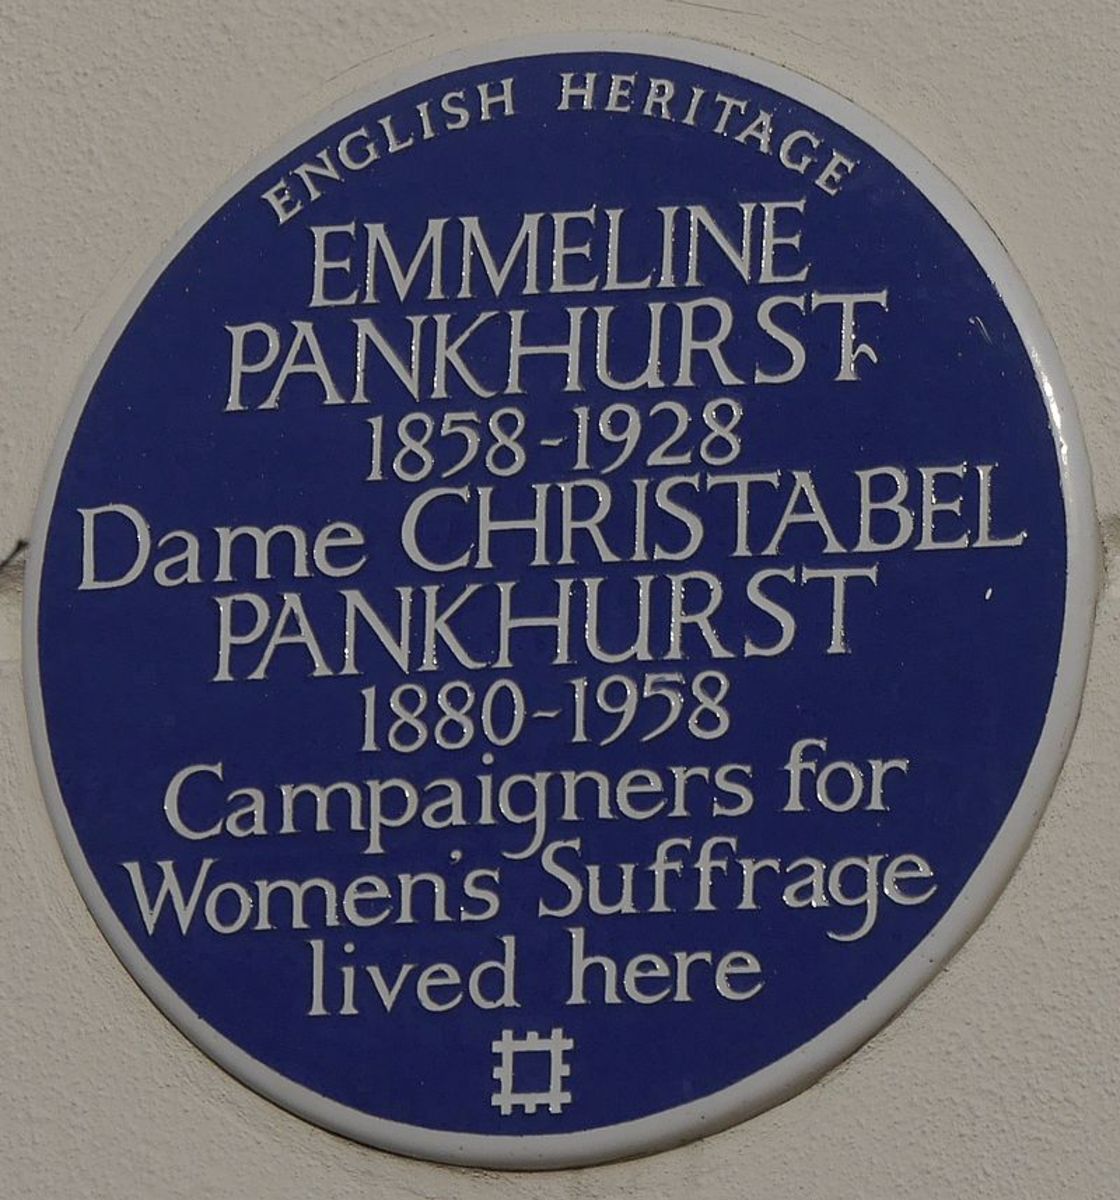 50 Clarendon Road, Holland Park London was Emmeliine and Christabel Pankhurst's home, as commemorated by this plaque. 